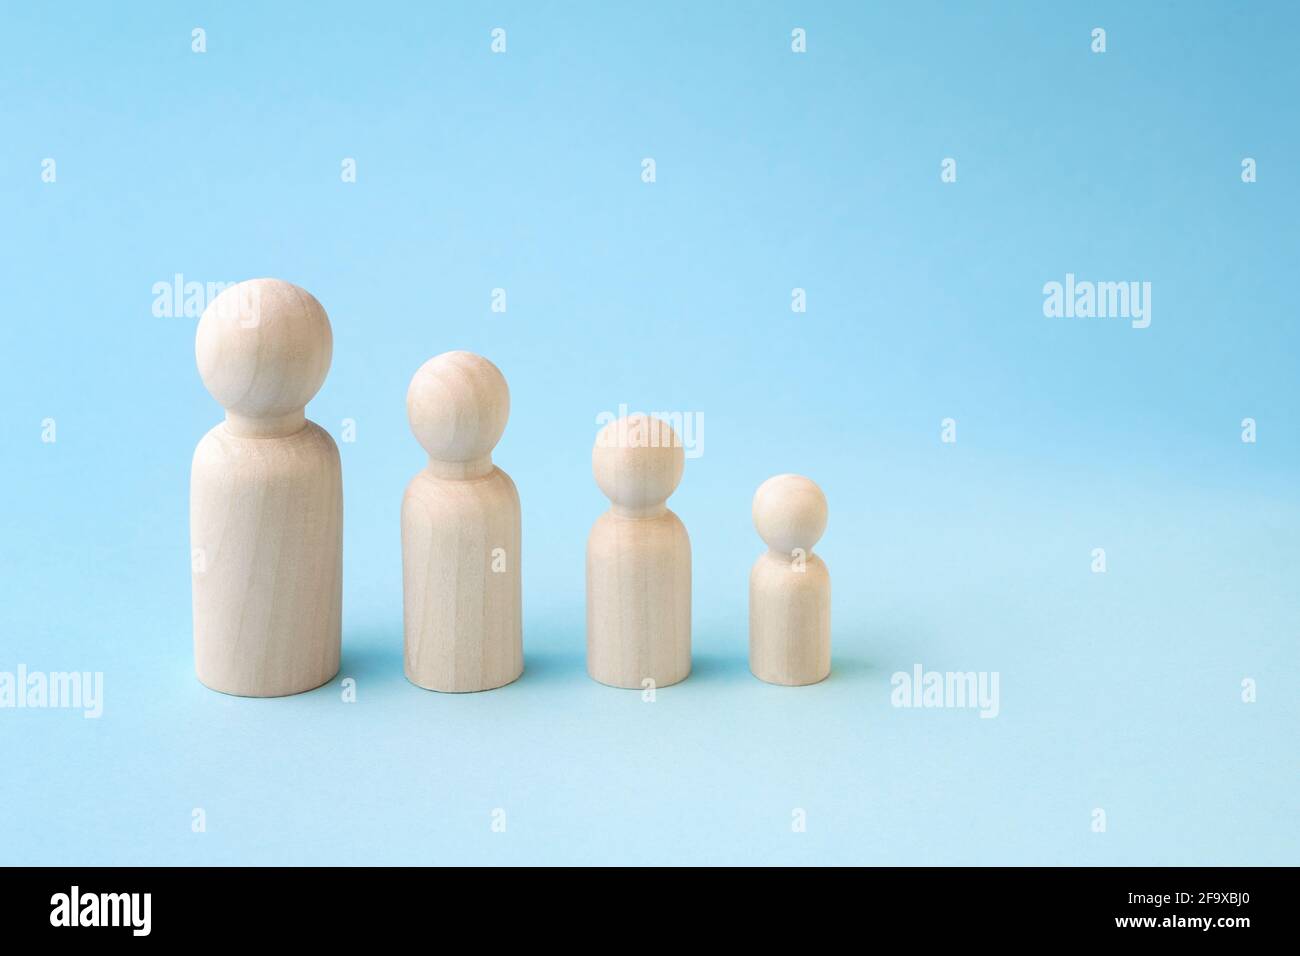 Wooden figurines standing in line from high to low on blue background. Family members or personal Stock Photo